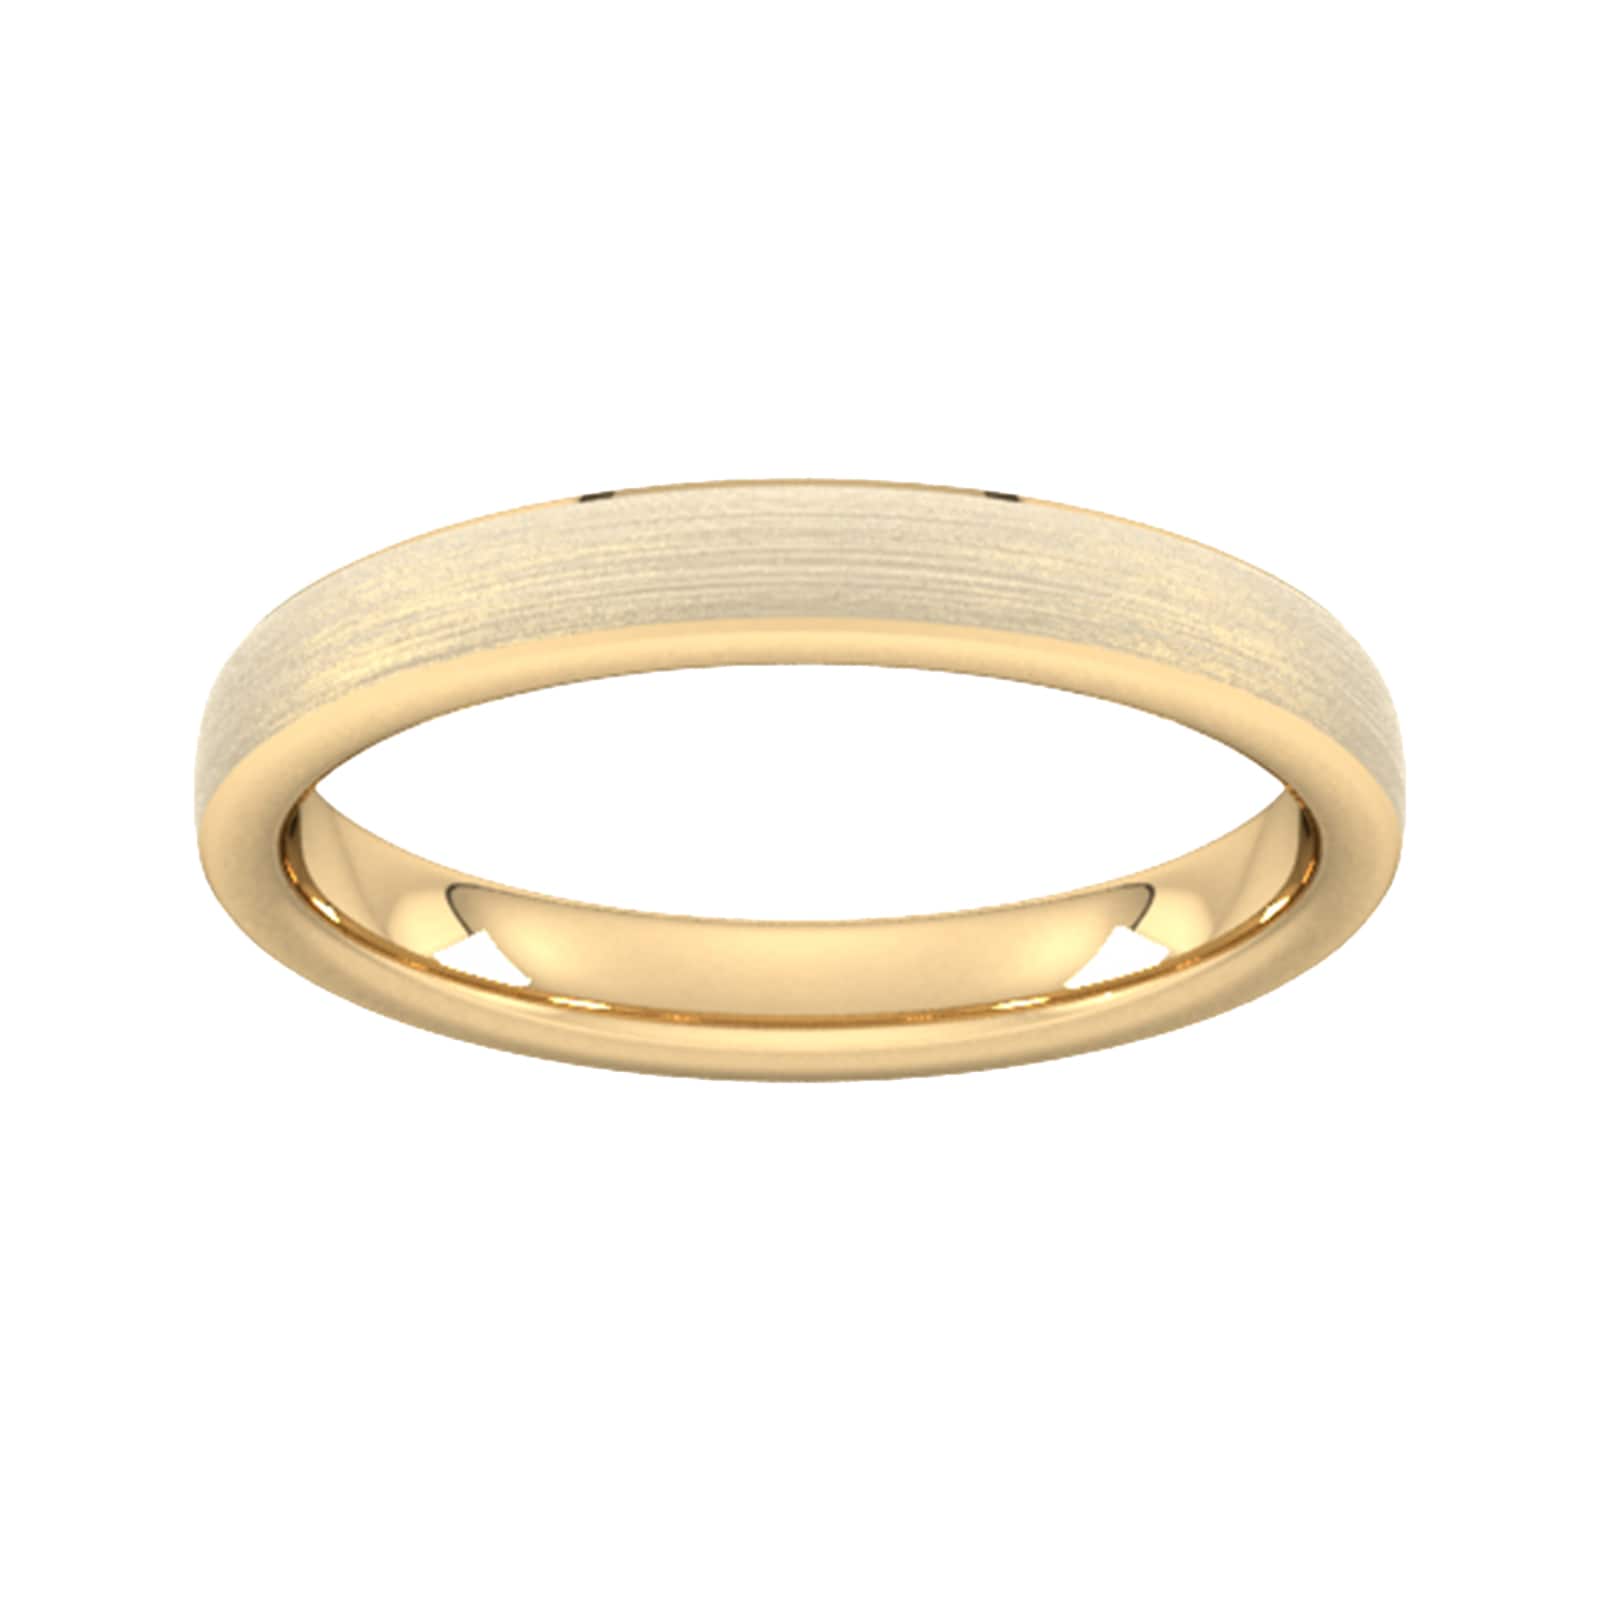 3mm Slight Court Standard Polished Chamfered Edges With Matt Centre Wedding Ring In 9 Carat Yellow Gold - Ring Size P